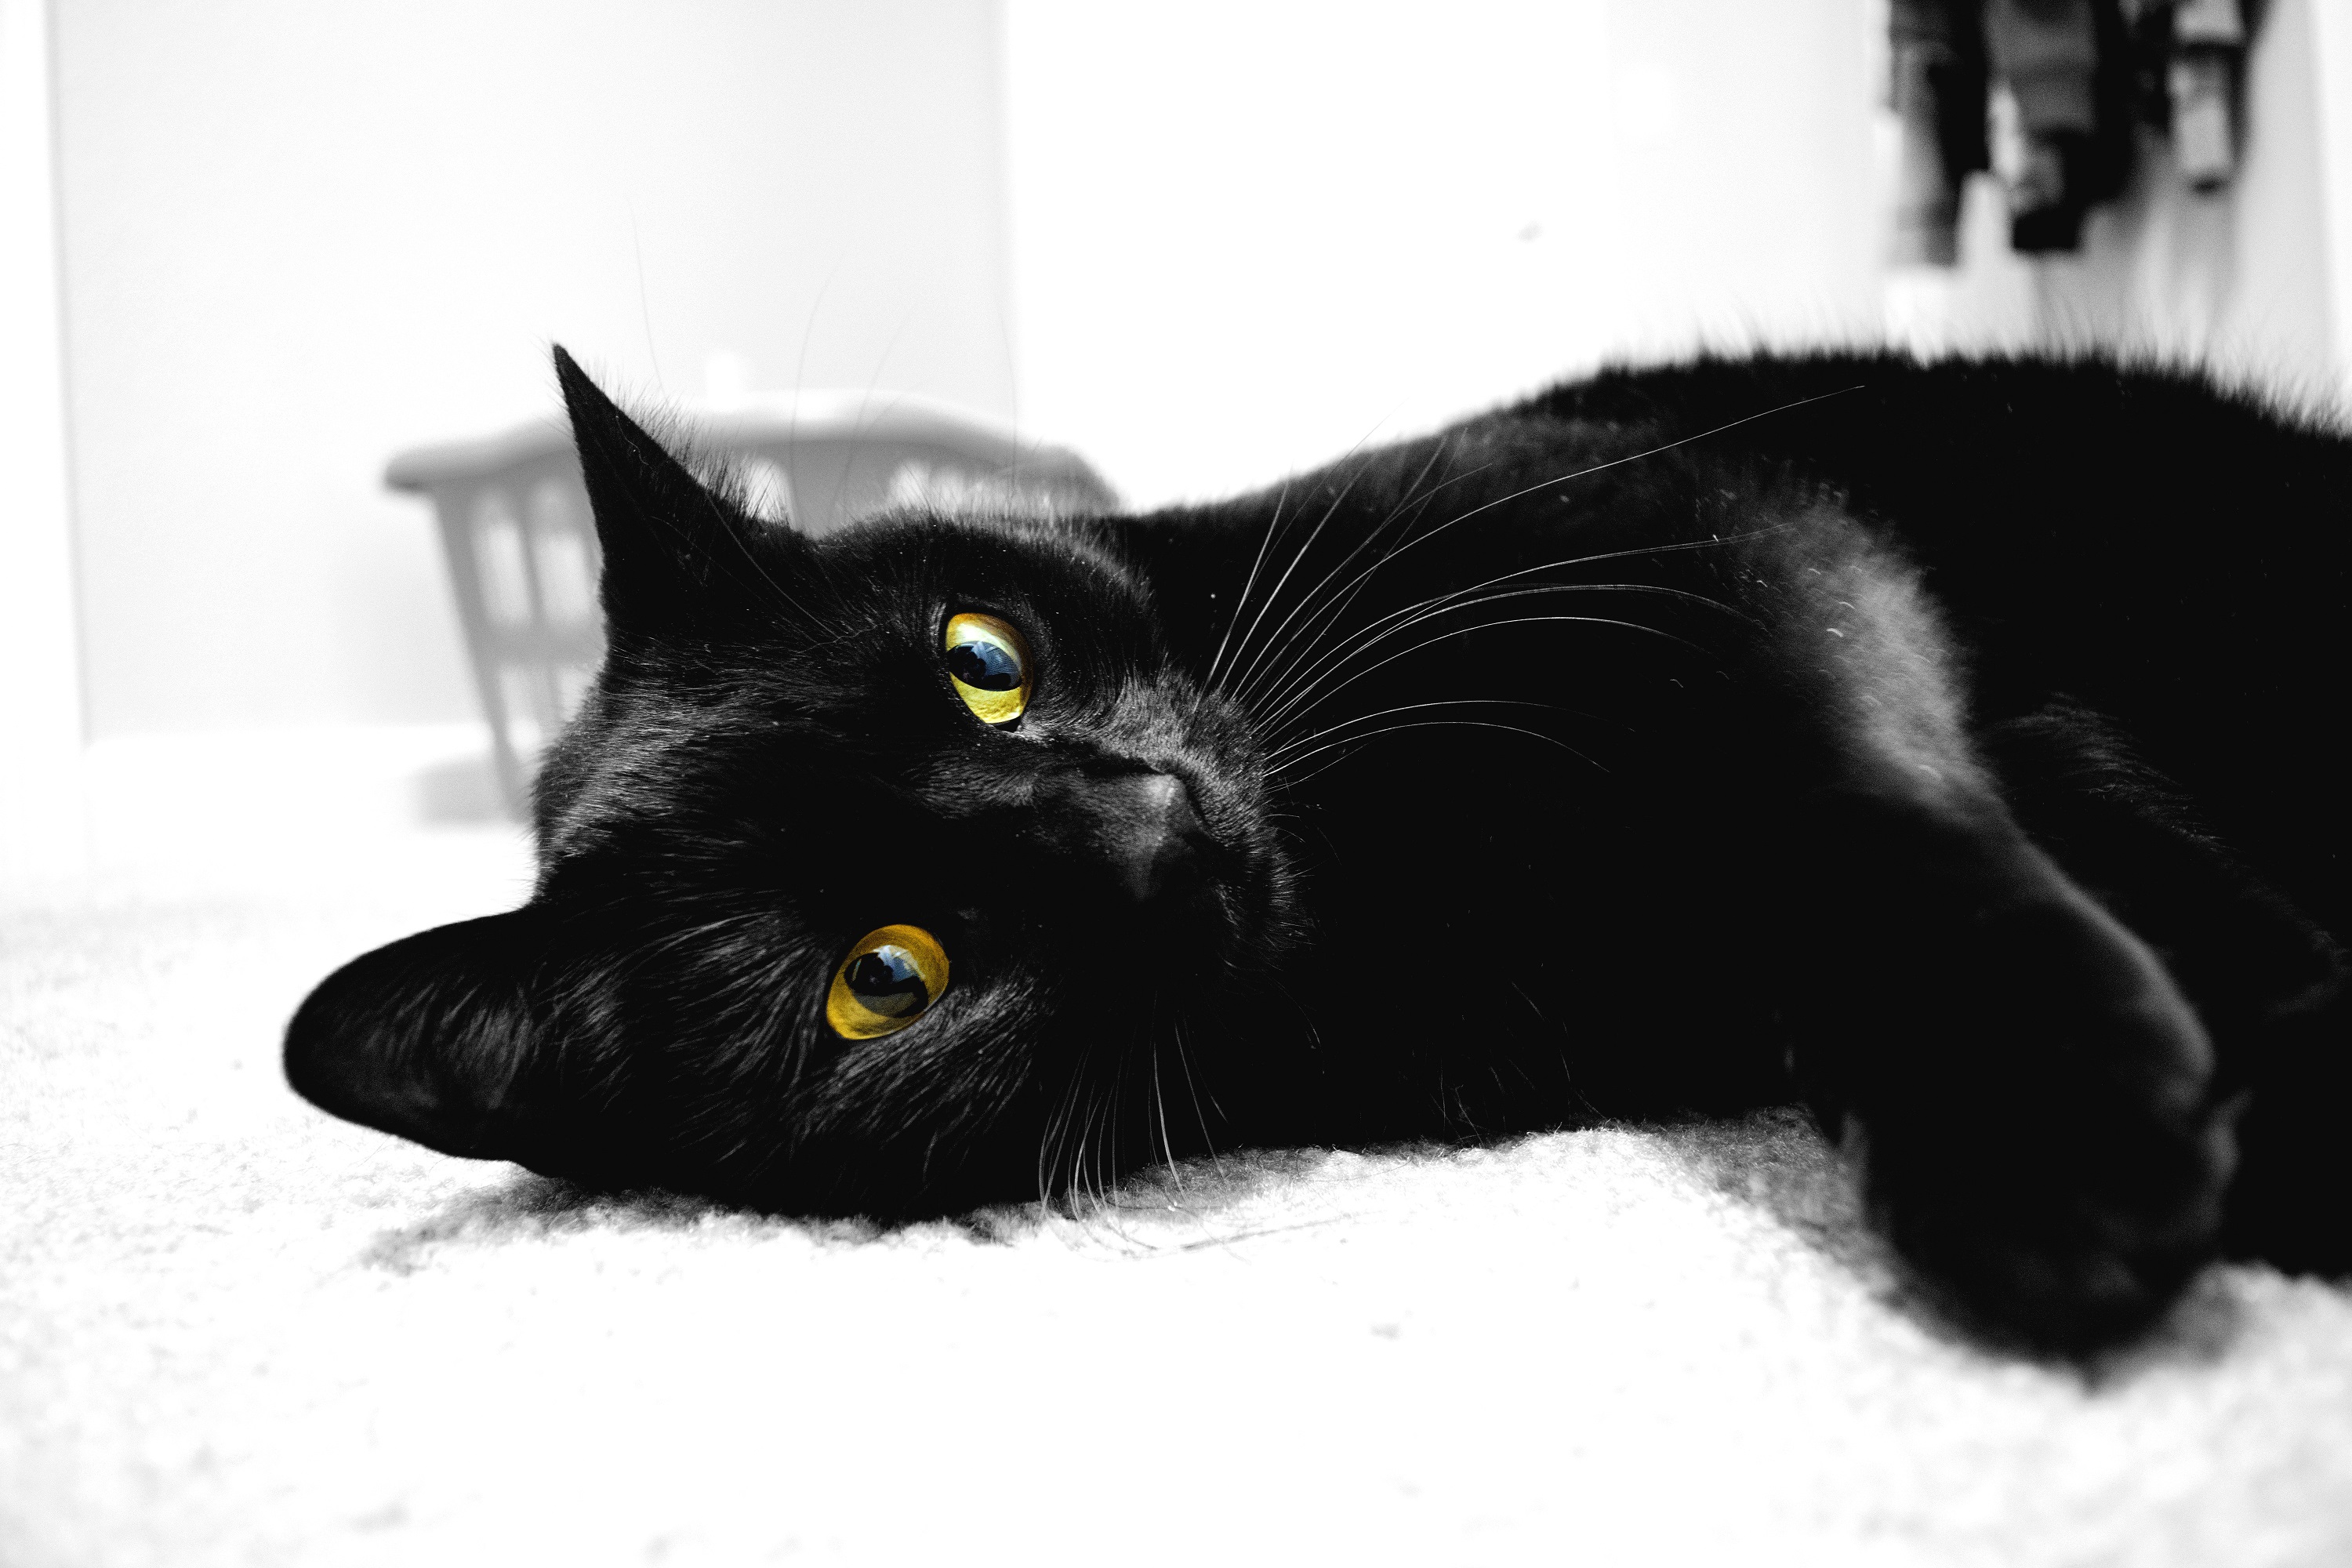 Caturday pic of a black cat with yellow eyes